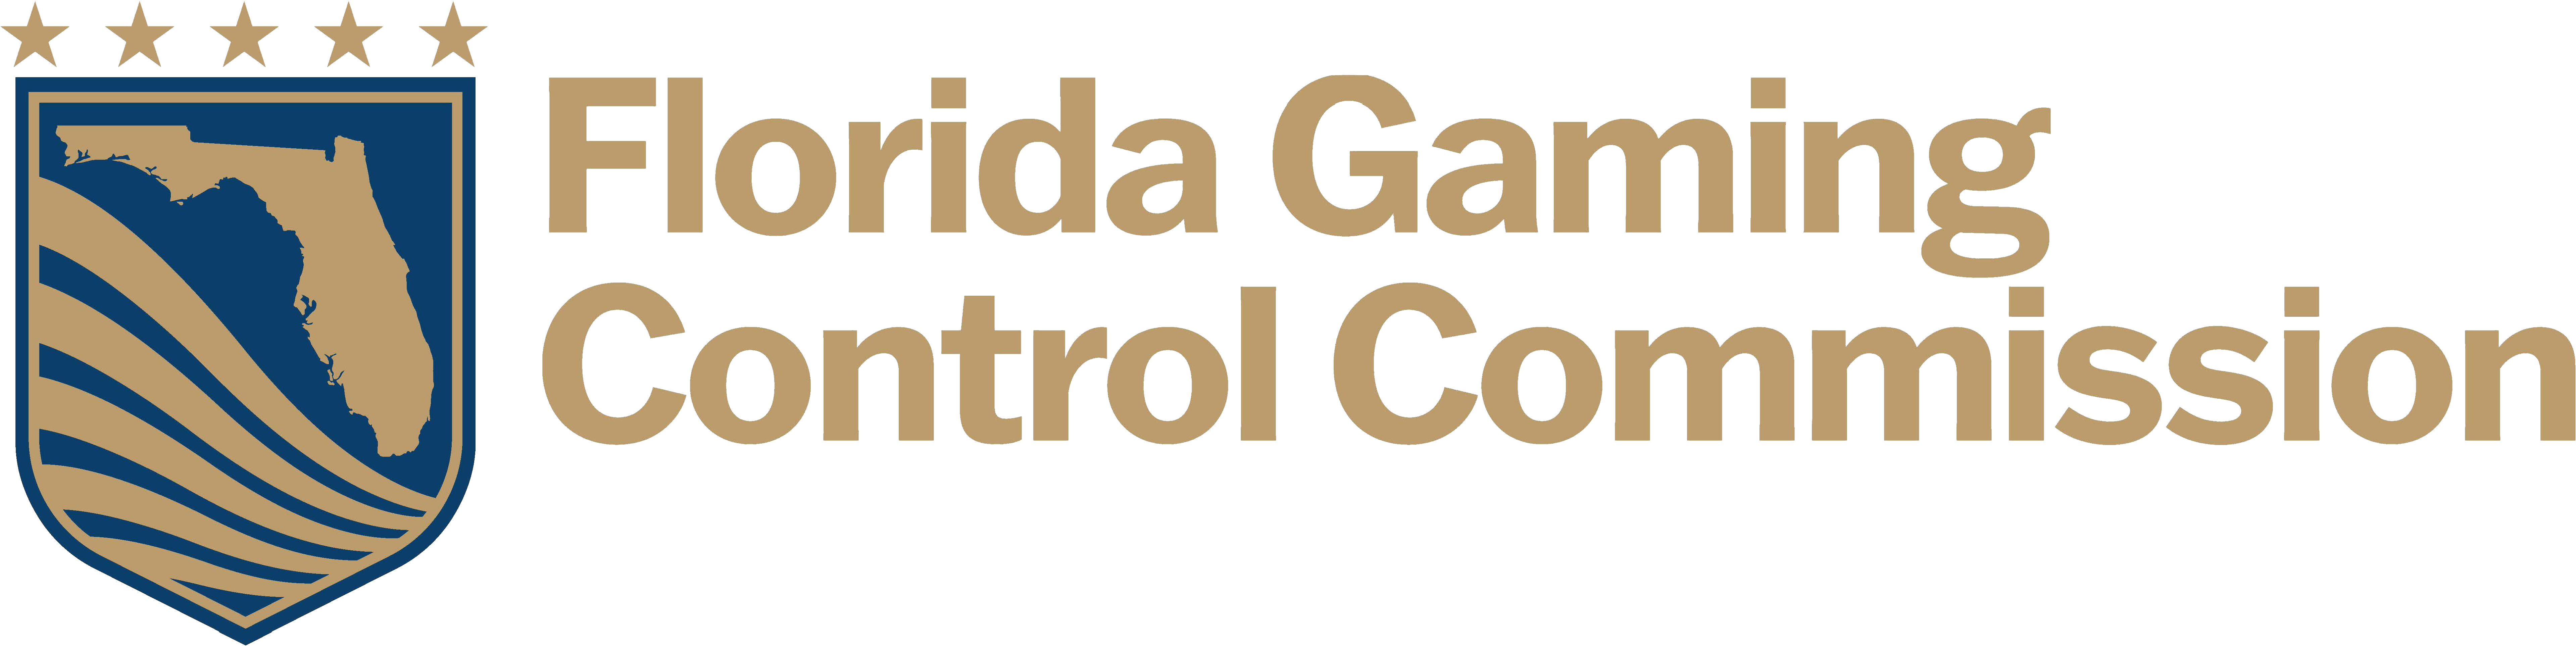 Florida Gaming Control Commission